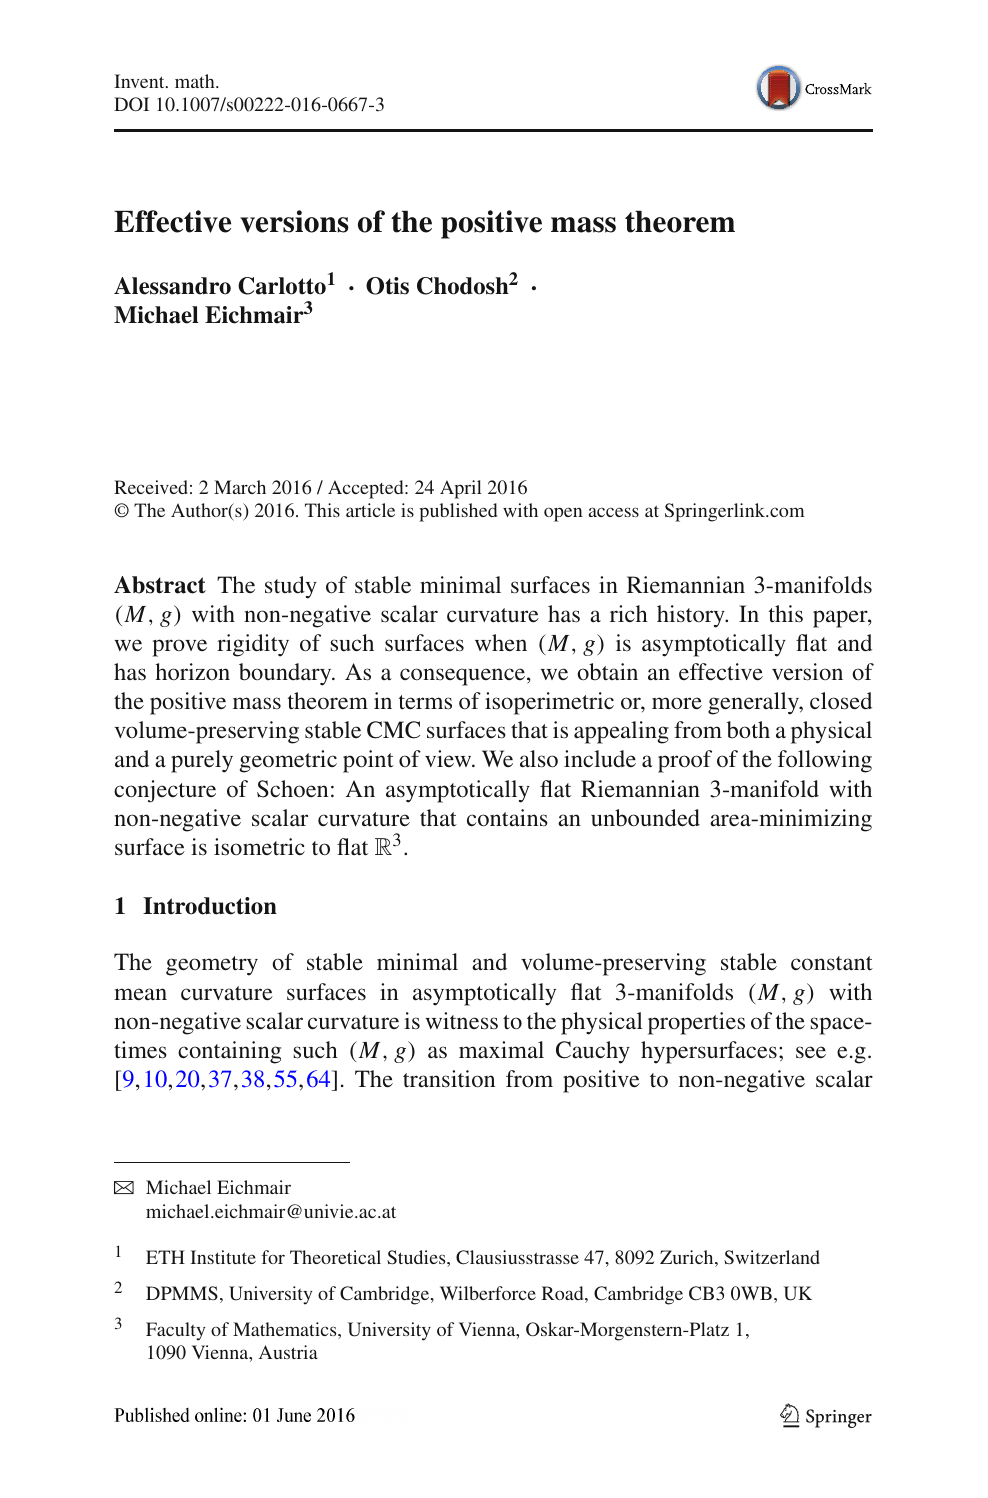 Effective Versions Of The Positive Mass Theorem Topic Of Research Paper In Mathematics Download Scholarly Article Pdf And Read For Free On Cyberleninka Open Science Hub